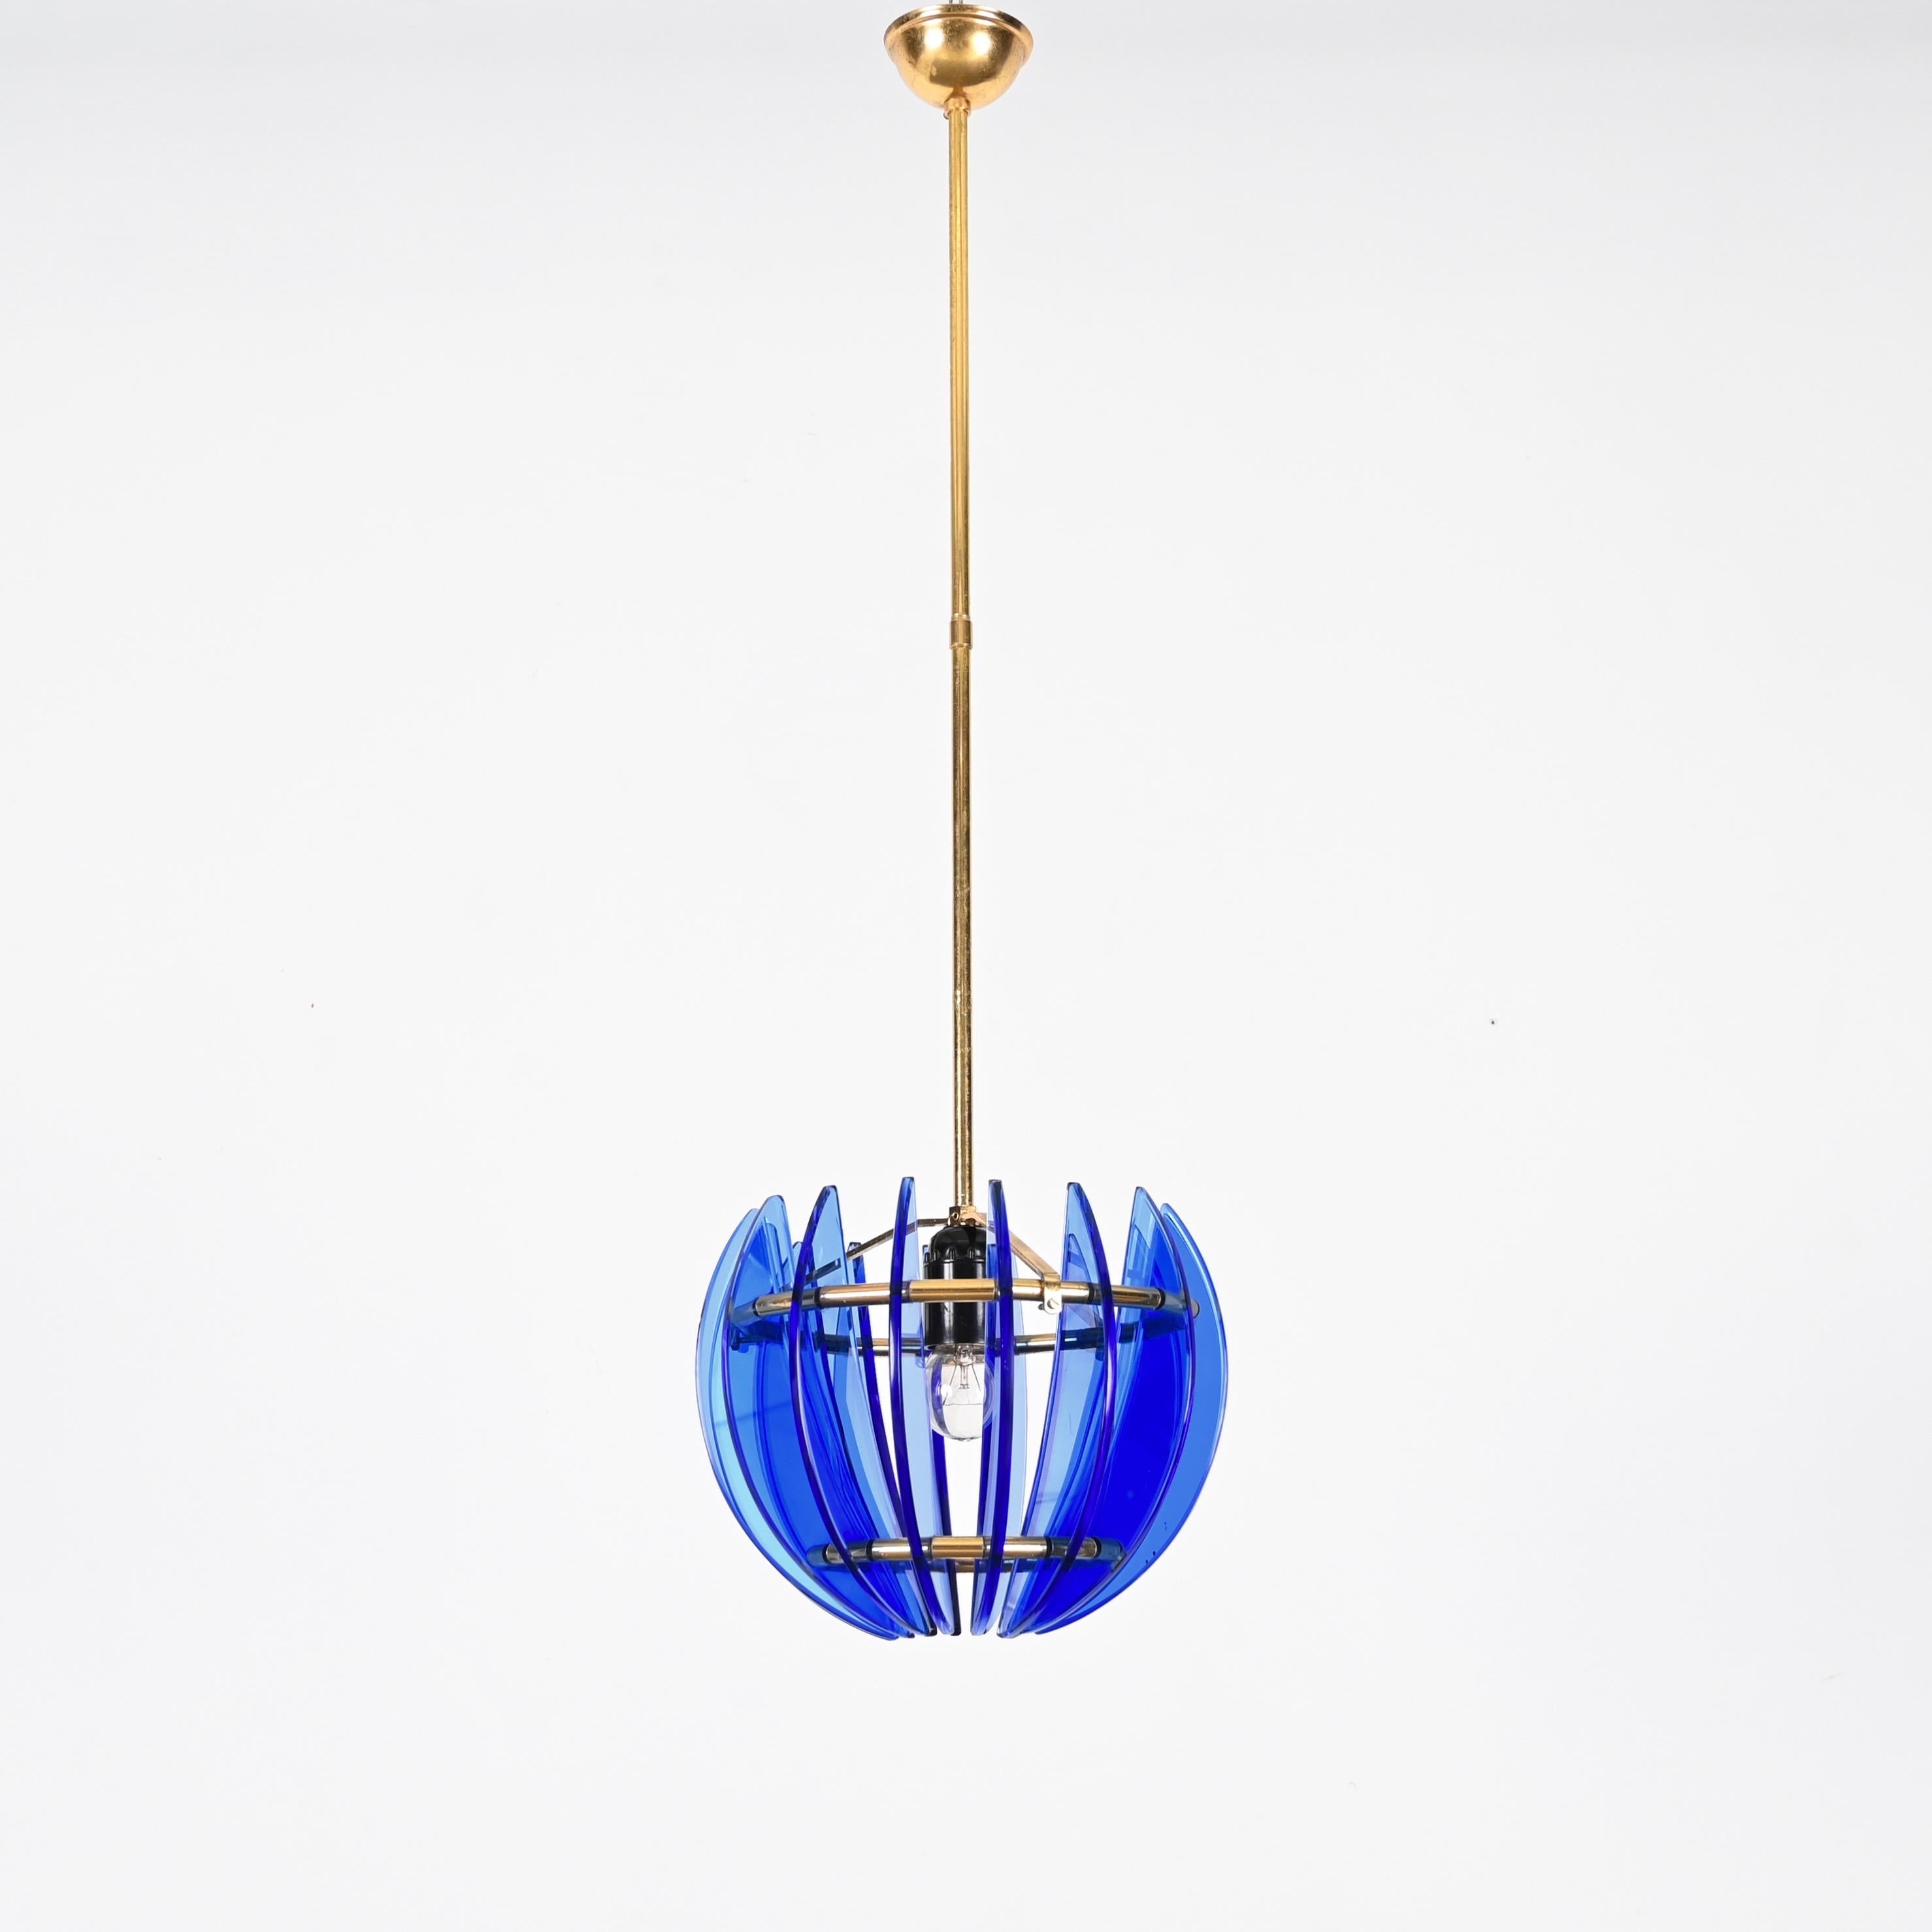 Mid-Century Italian pendant made in a stunning blue Murano artglass and solid brass. This incredibly charming pendant was produced by Galvorame  in Italy during the 1960s. 

This pendant consists of sixteen crescent-shaped murano glasses in a